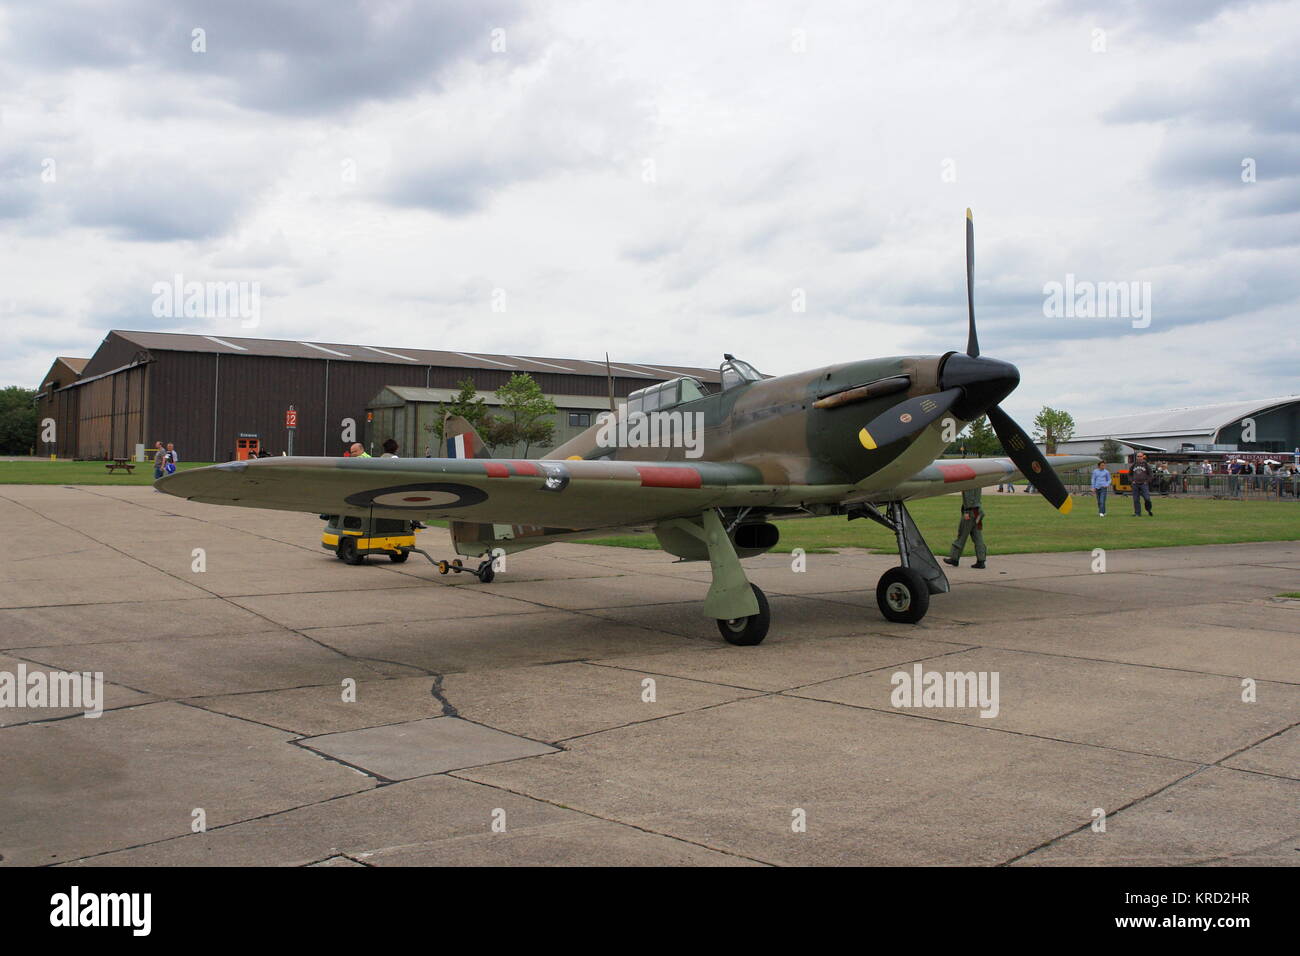 A Hurricane fighter plane, active during the Second World War, on an airfield, possibly at an air museum. Stock Photo